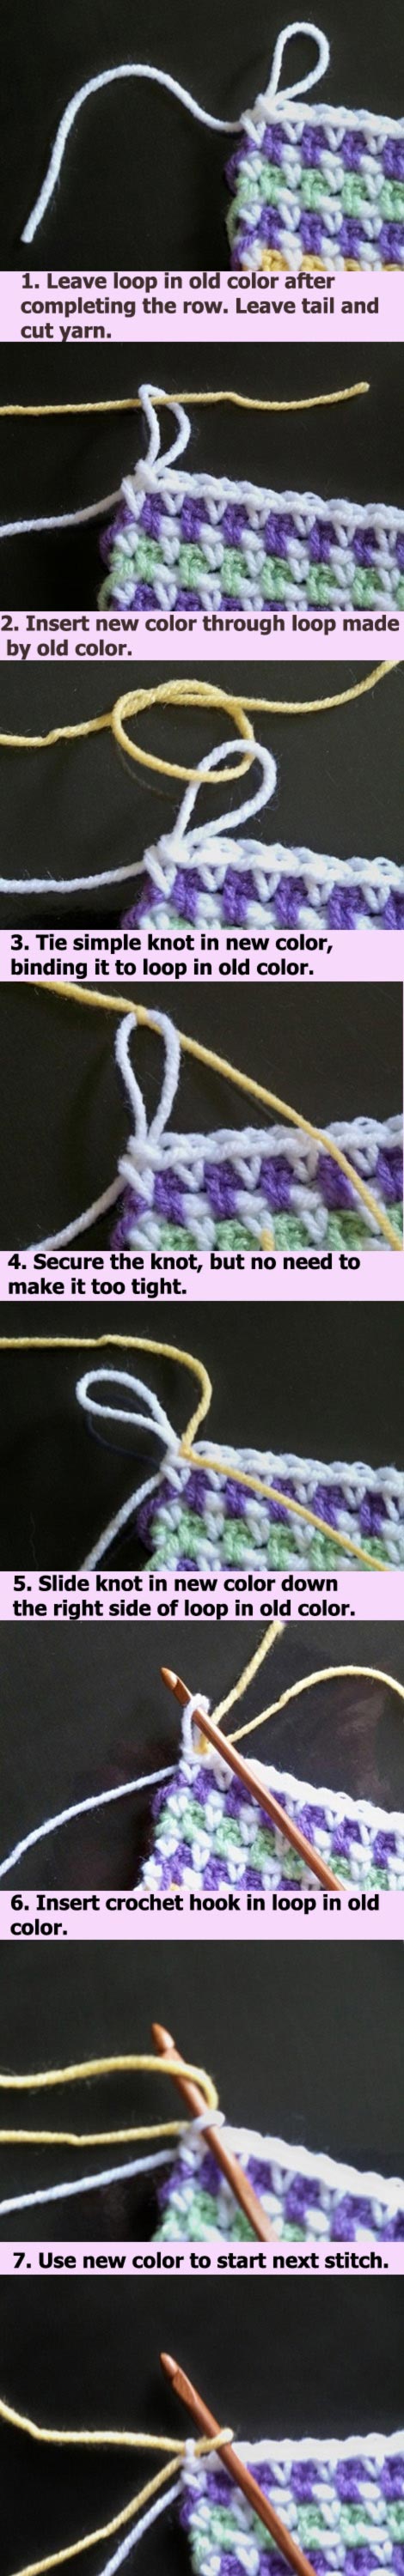 A Very Neat Way to Change Yarn Invisibly in Crochet. 